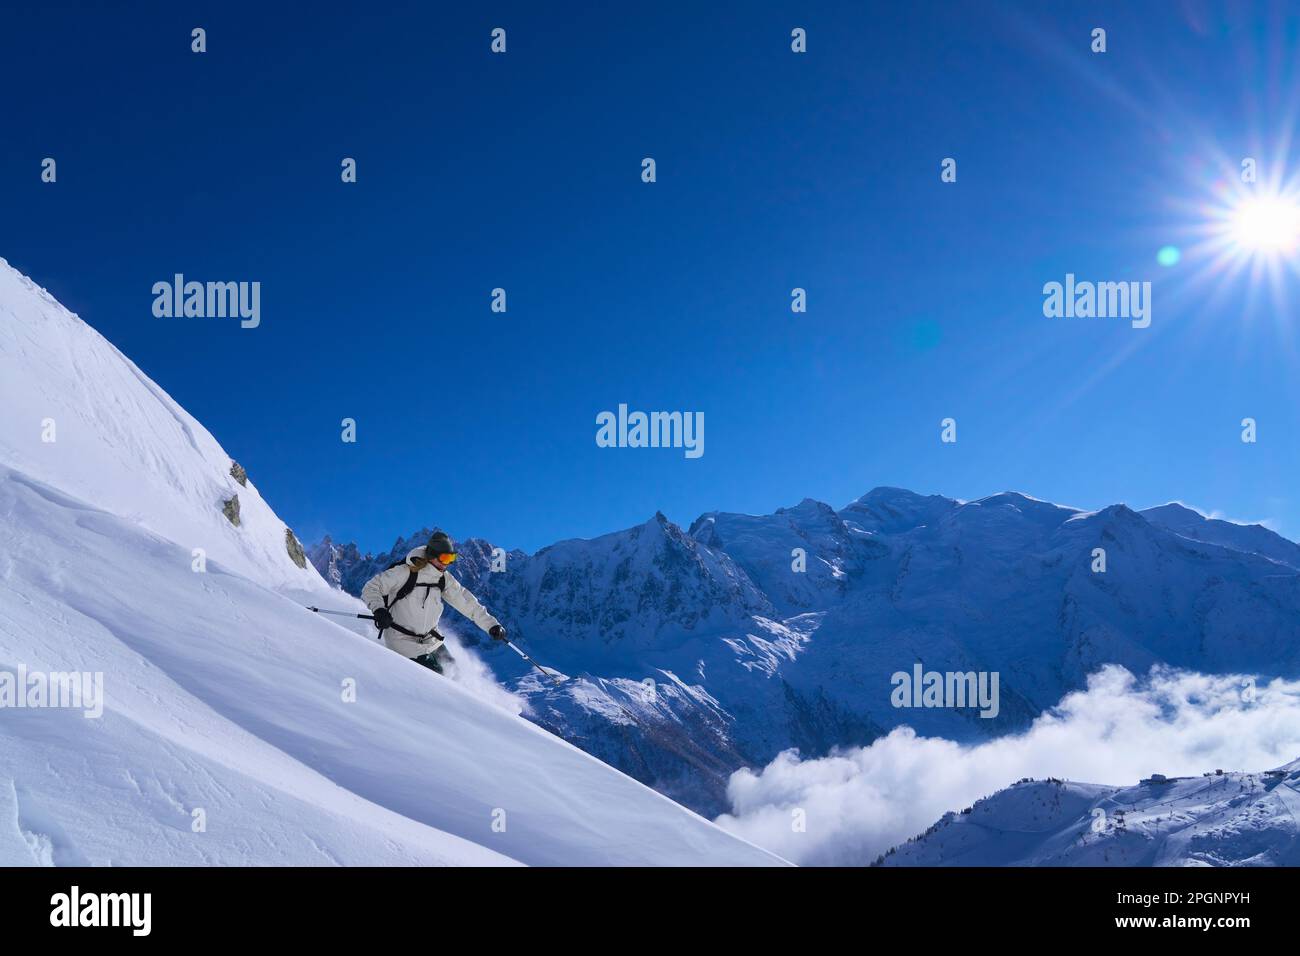 Woman skiing in snow on sunny day Stock Photo